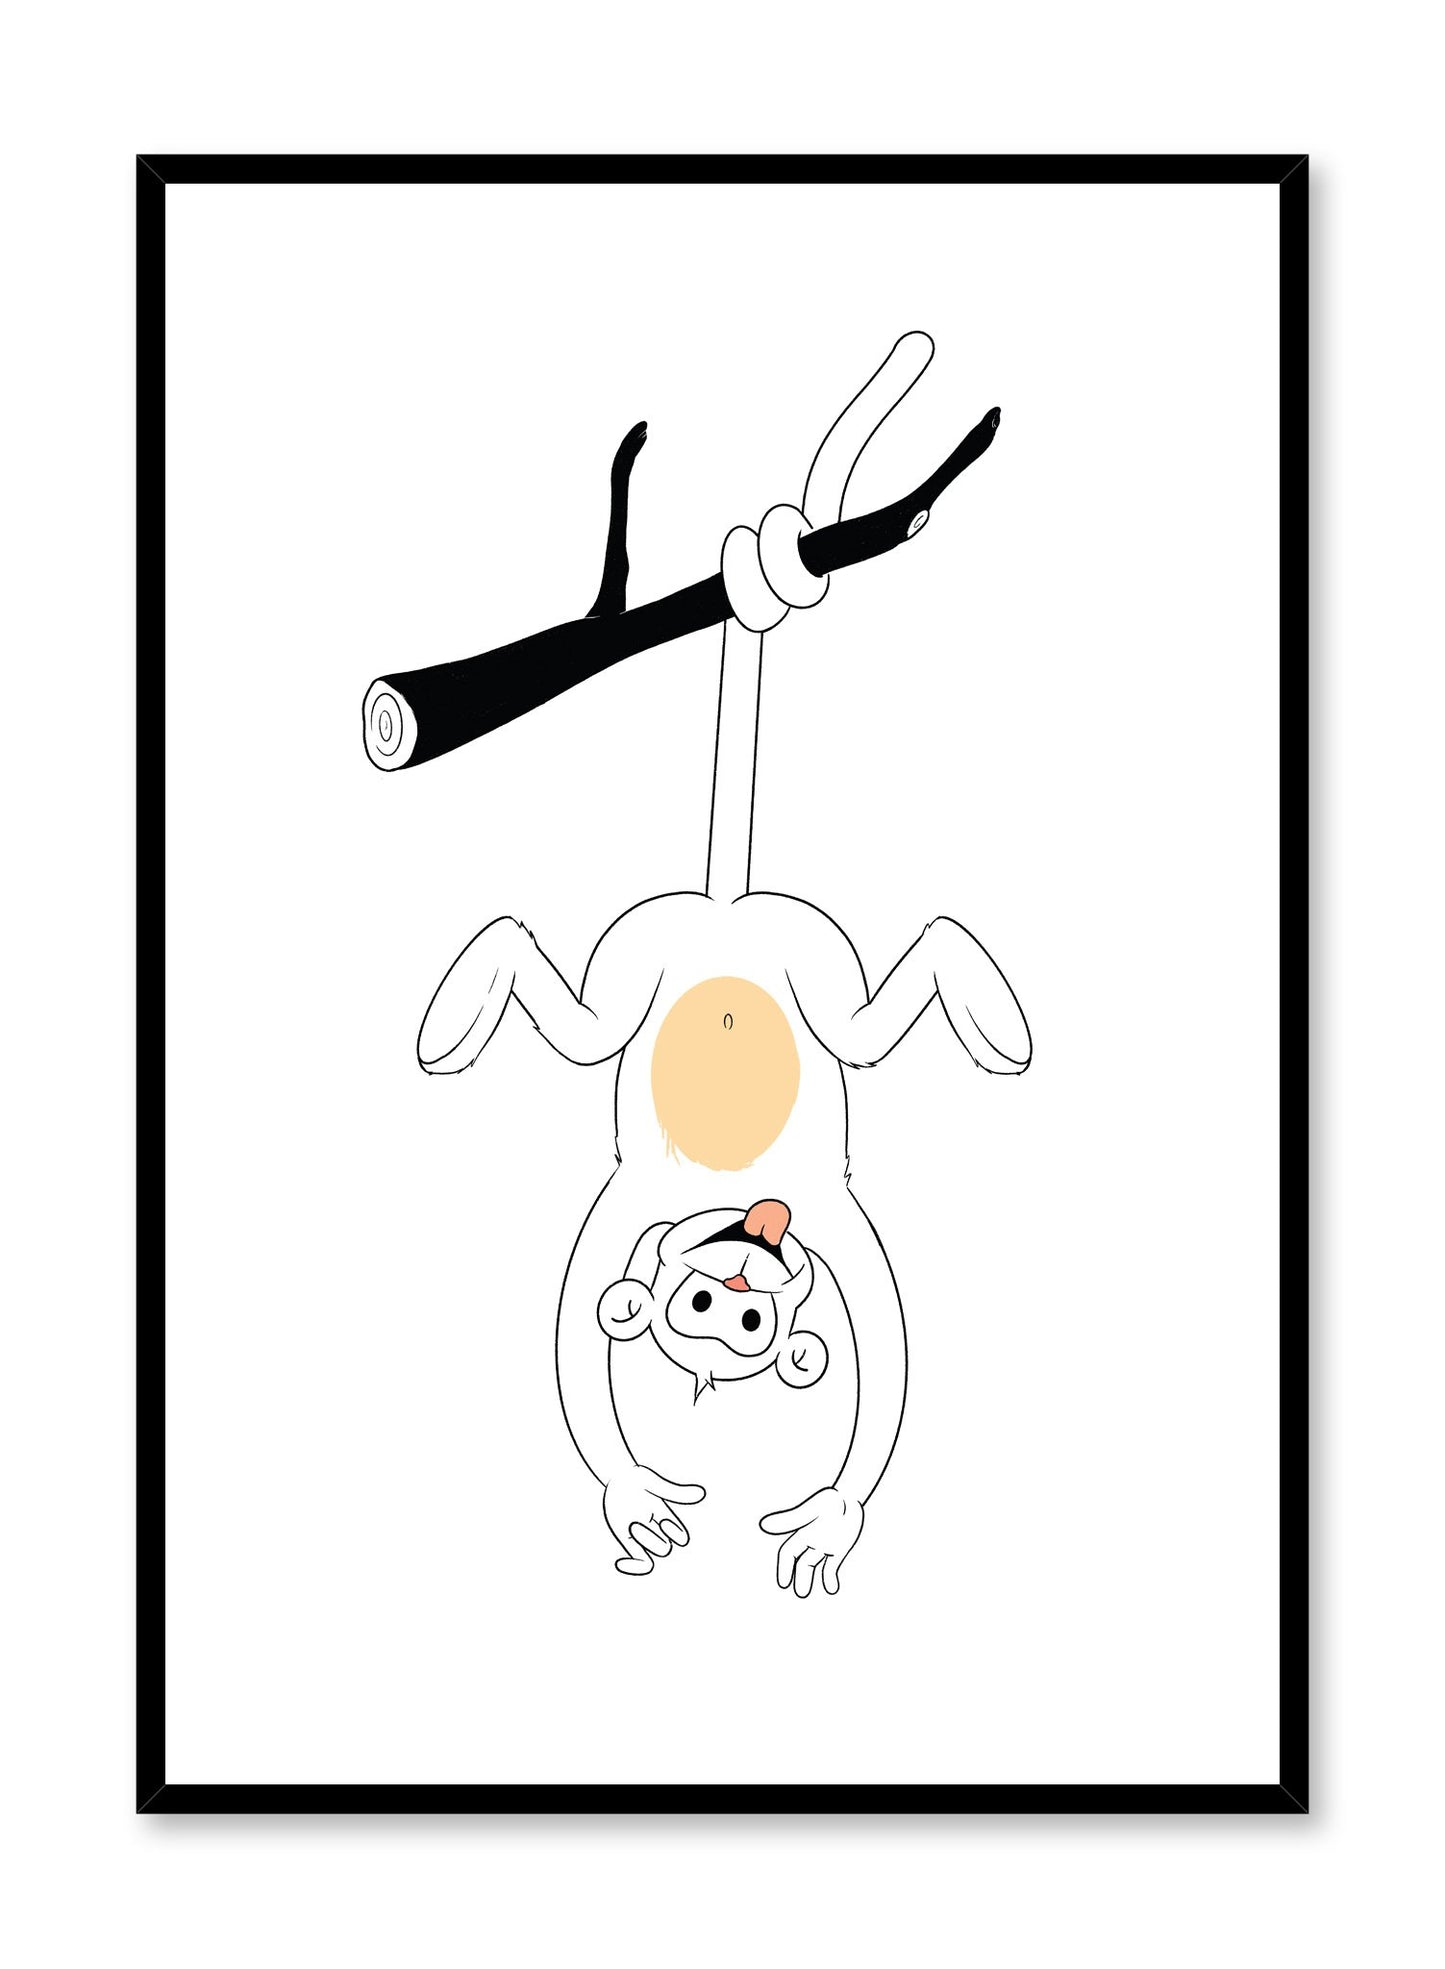 Modern minimalist poster by Opposite Wall with kids illustration of a silly monkey